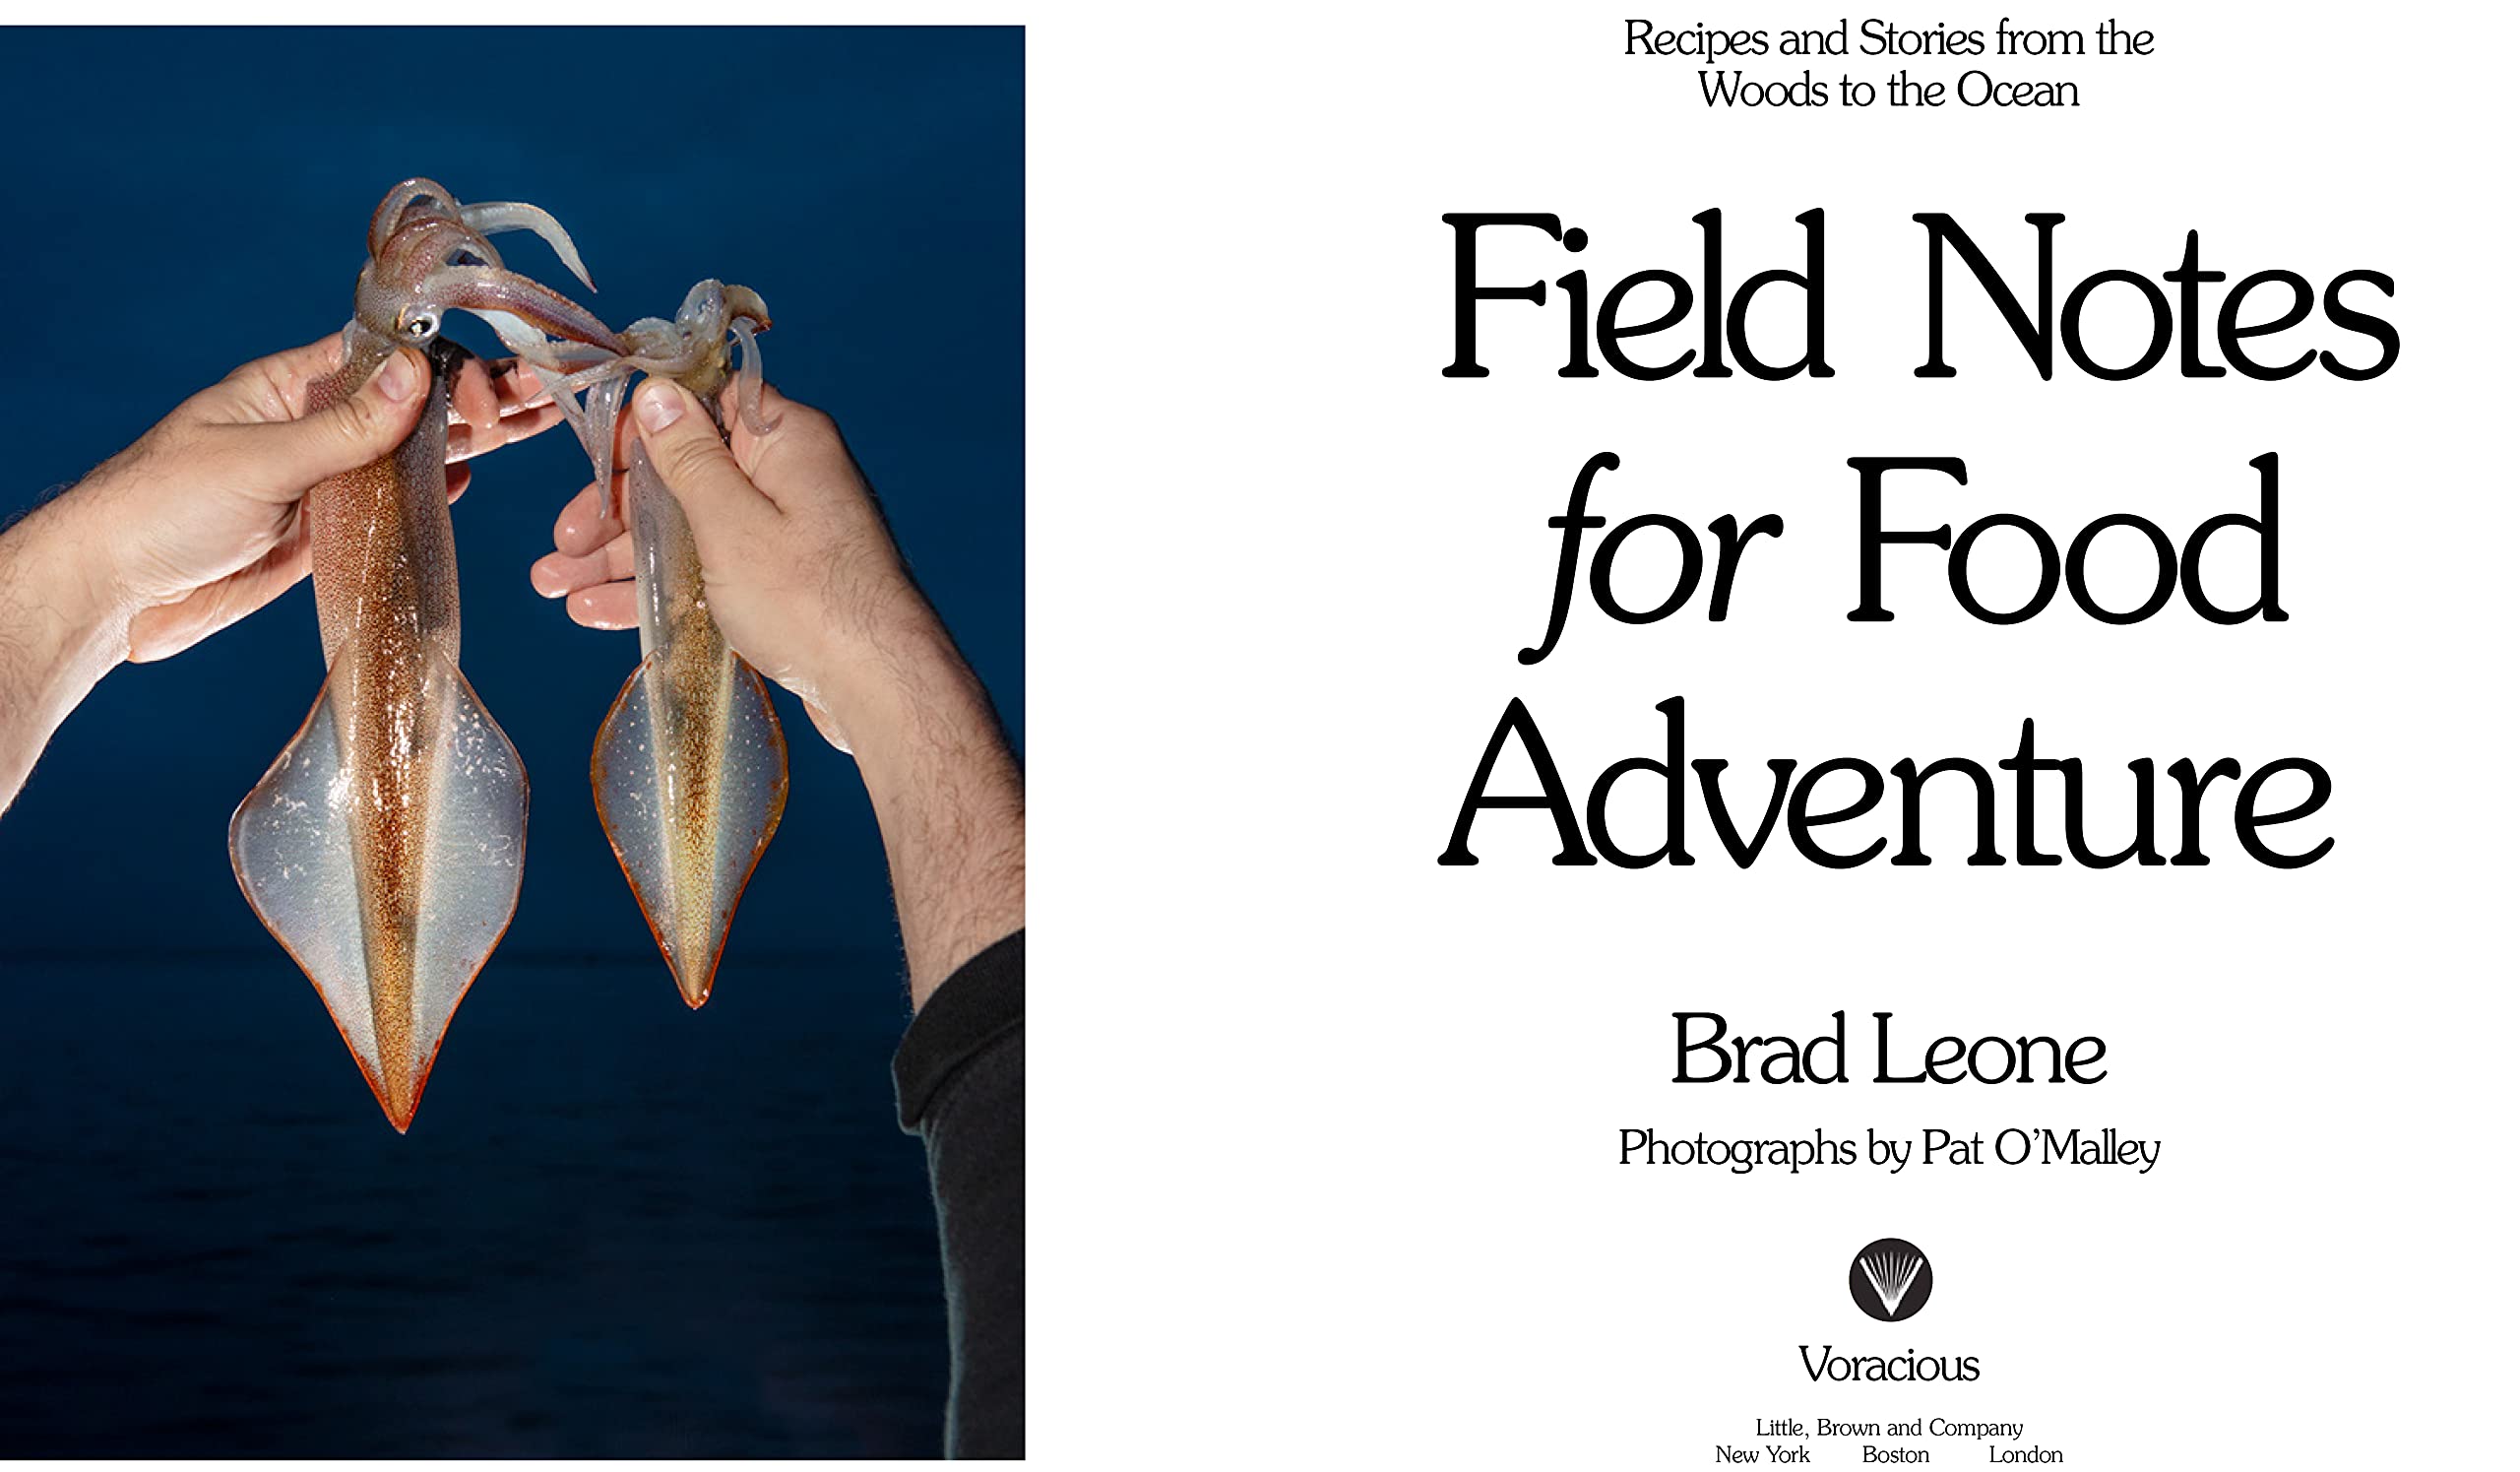 Field Notes for Food Adventure: Recipes and Stories from the Woods to the Ocean (Brad Leone)